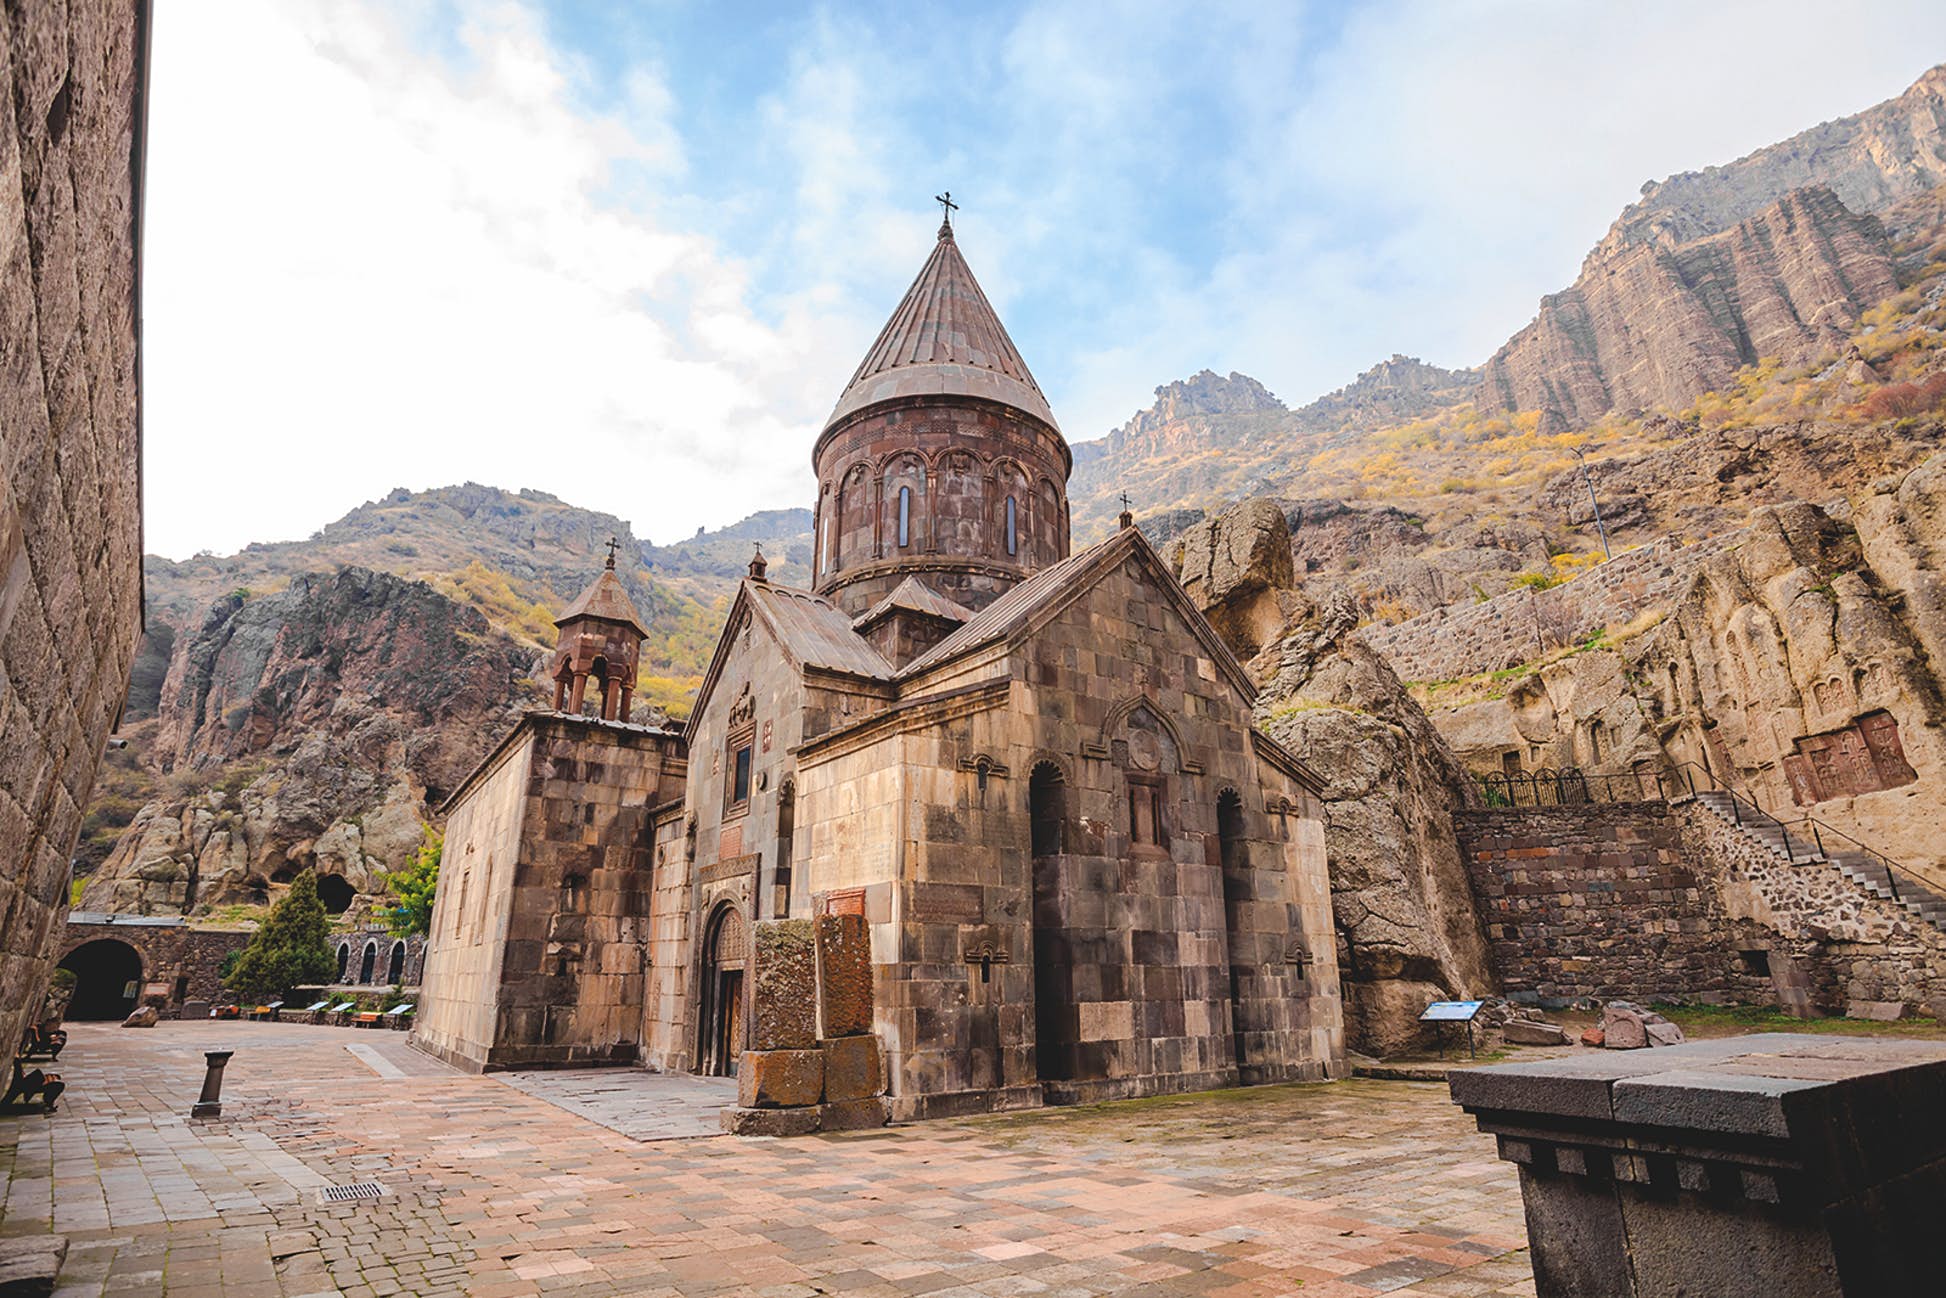 The Monastery of Geghard occupies an awesome spot at the foot of cliffs in Armenia © Takepicsforfun / Getty Images